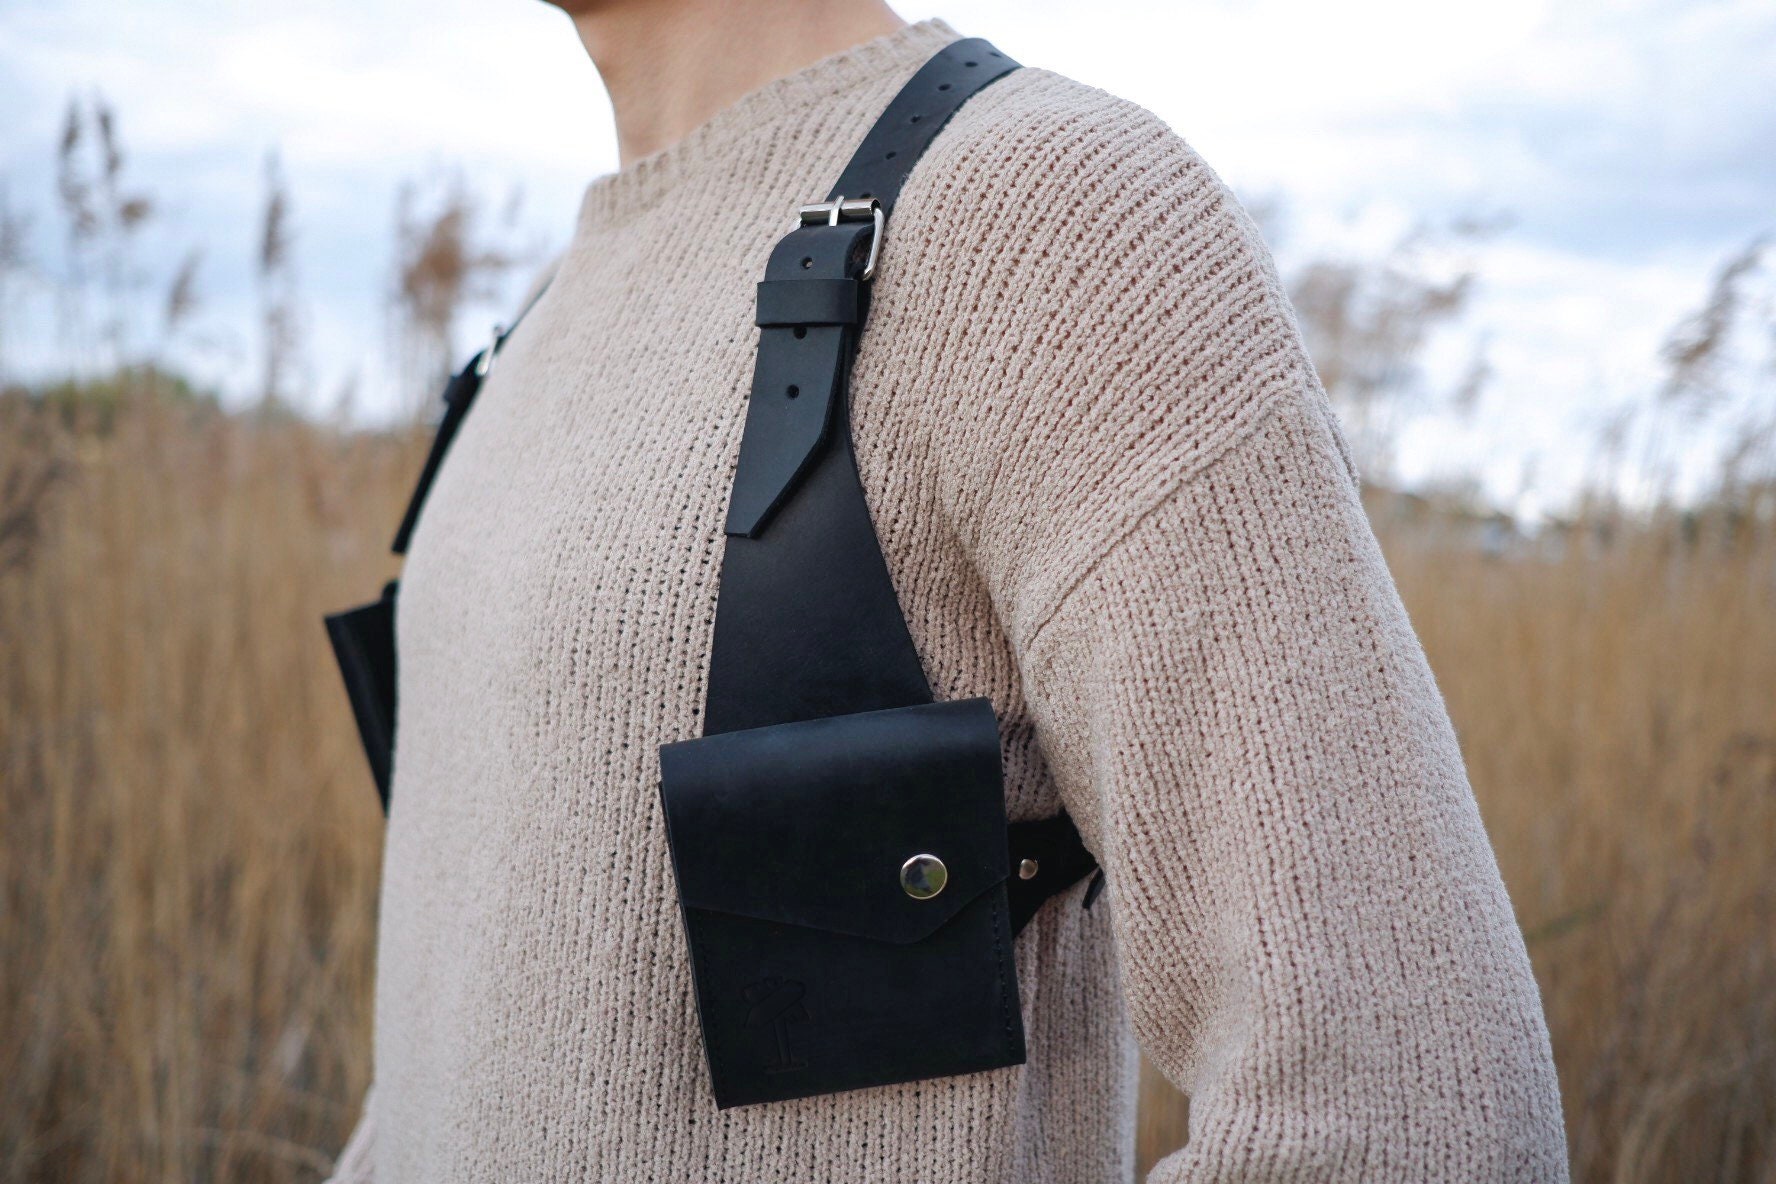 Leather Accessory Holster Bag 